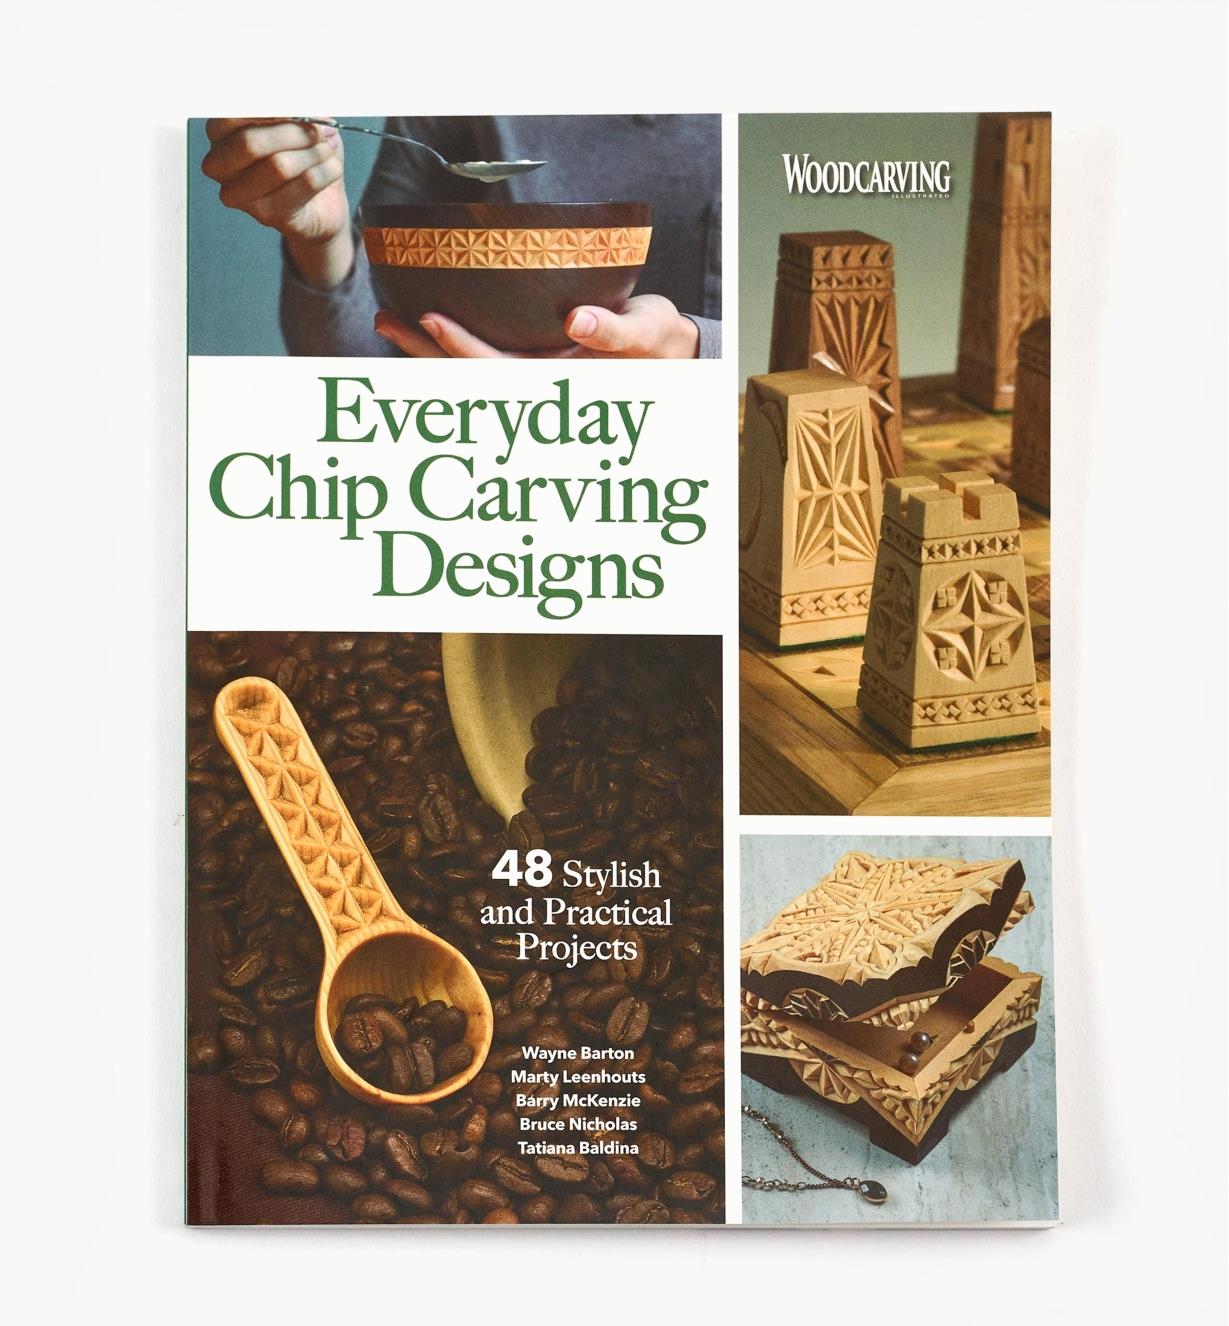 Getting Started on a Chip Carving Project - Lee Valley Tools